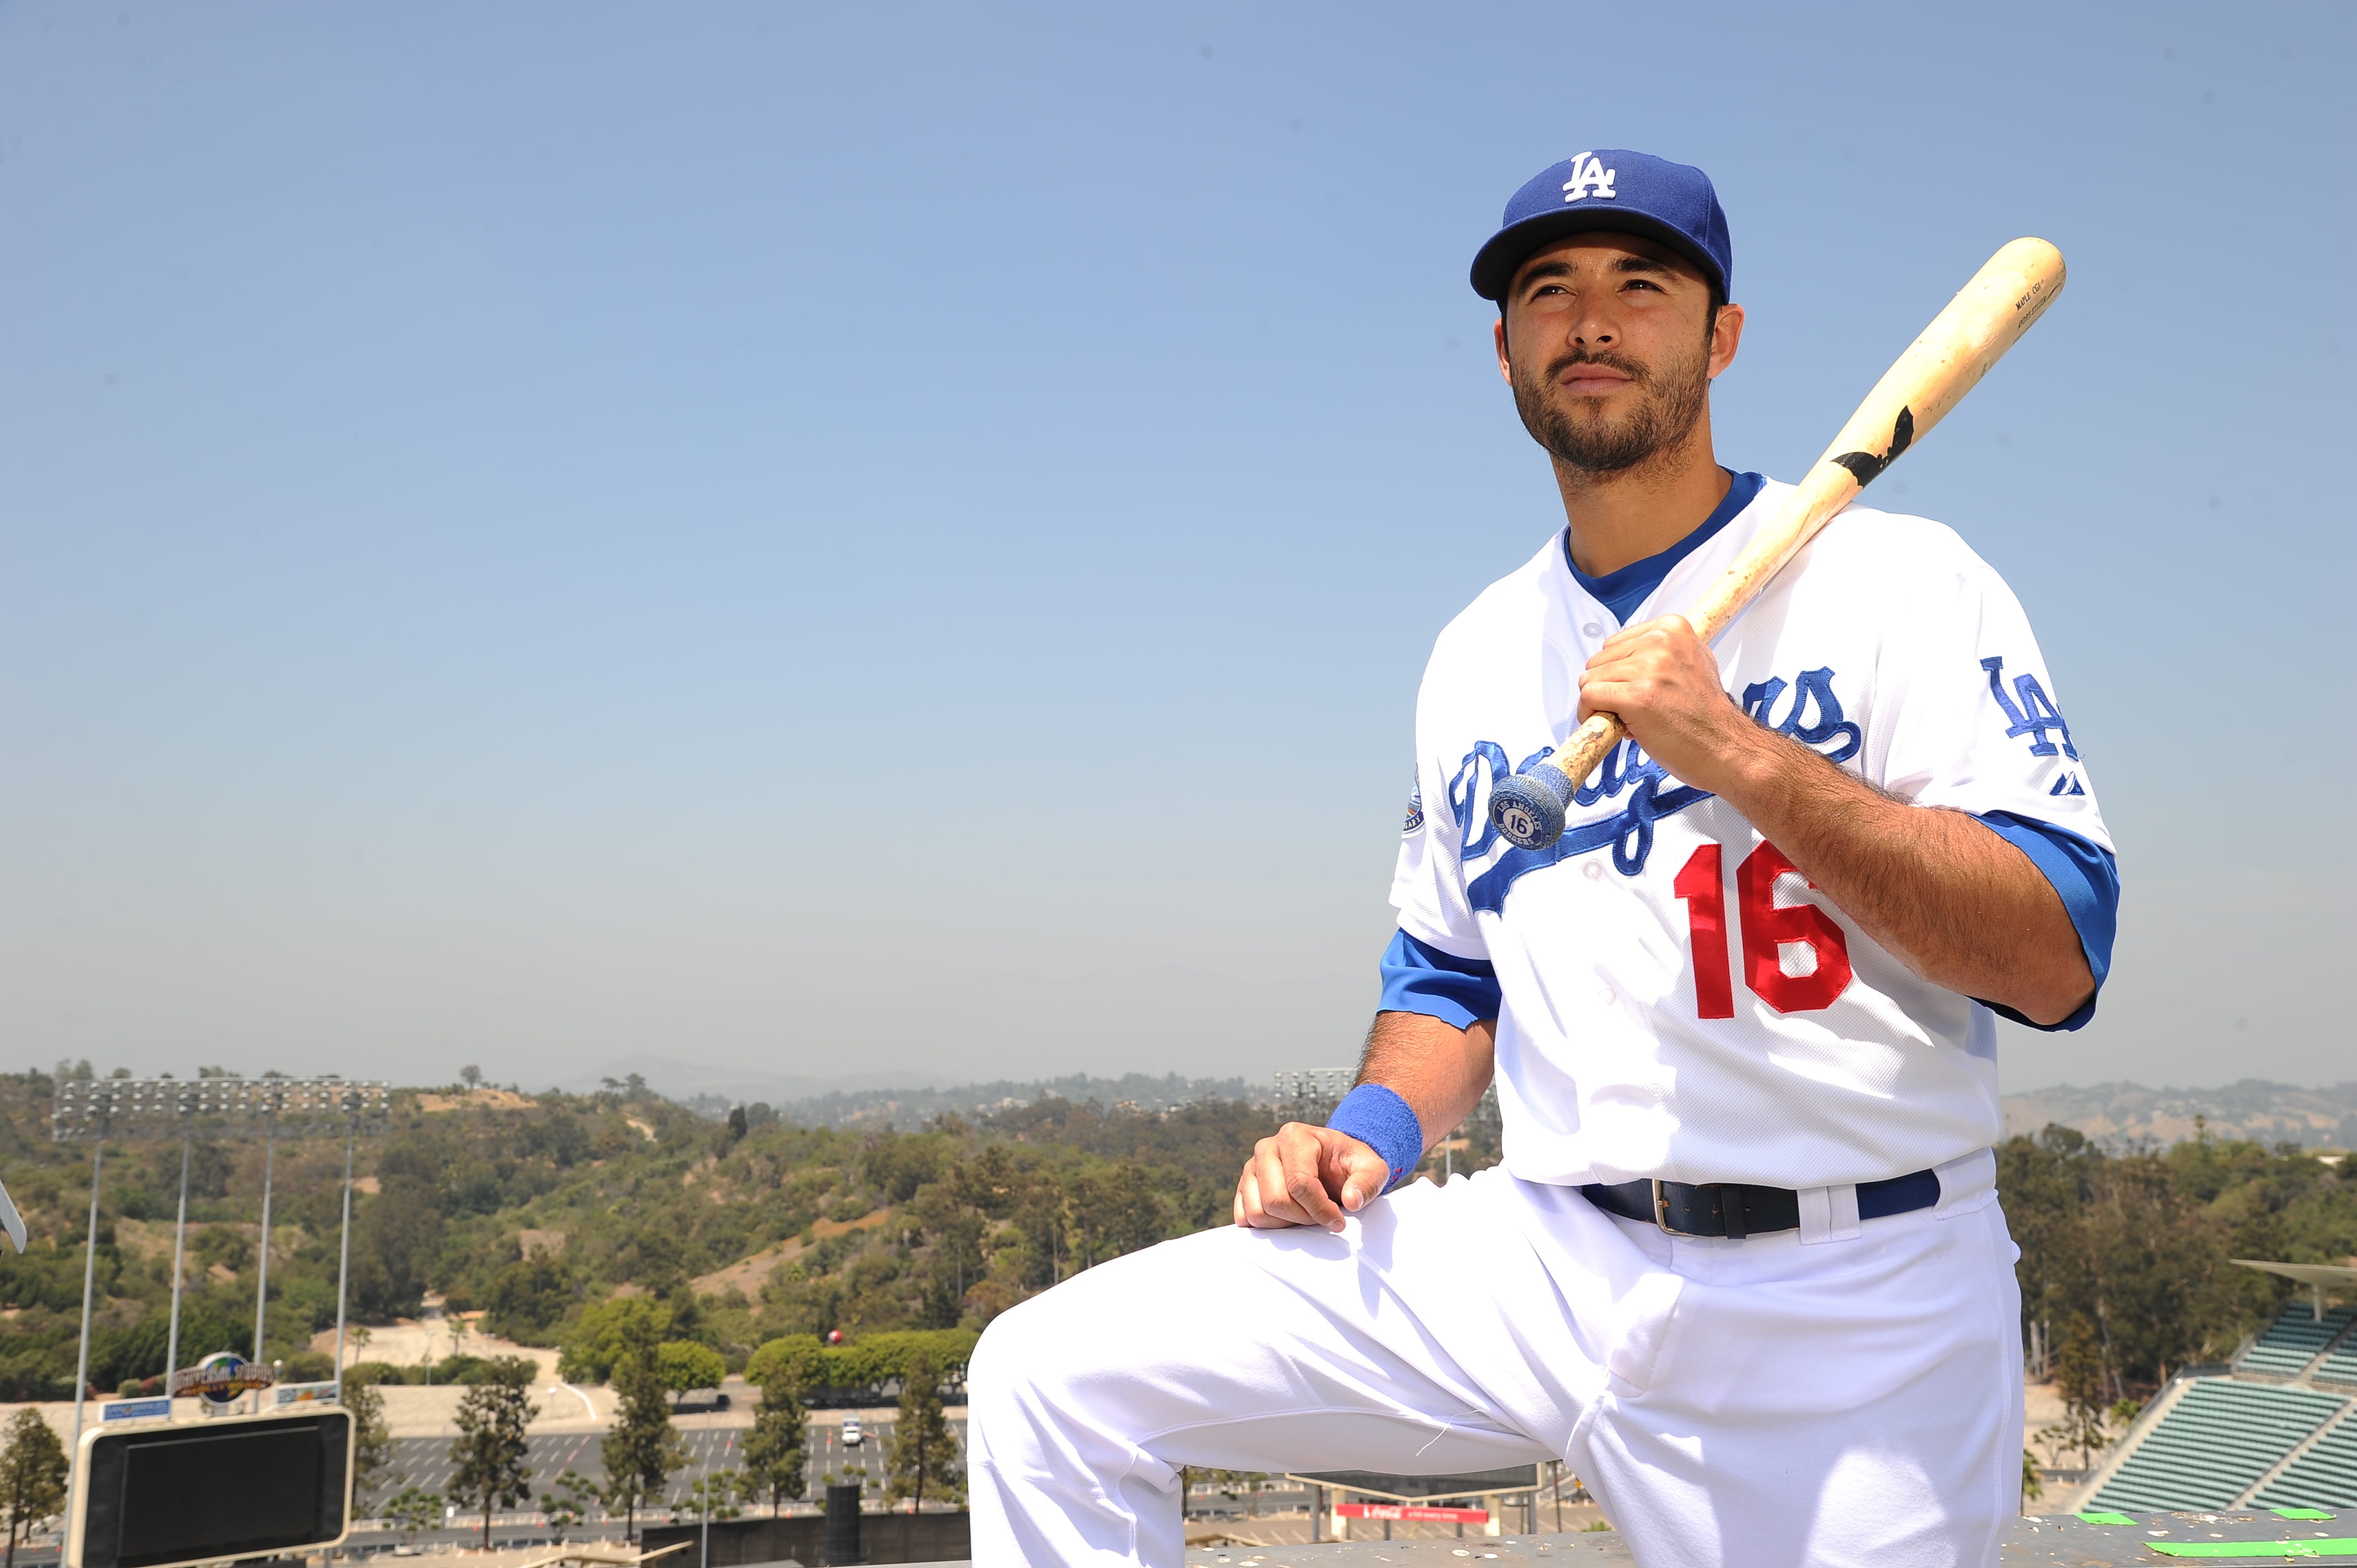 Andre Ethier — Mr. Clutch 